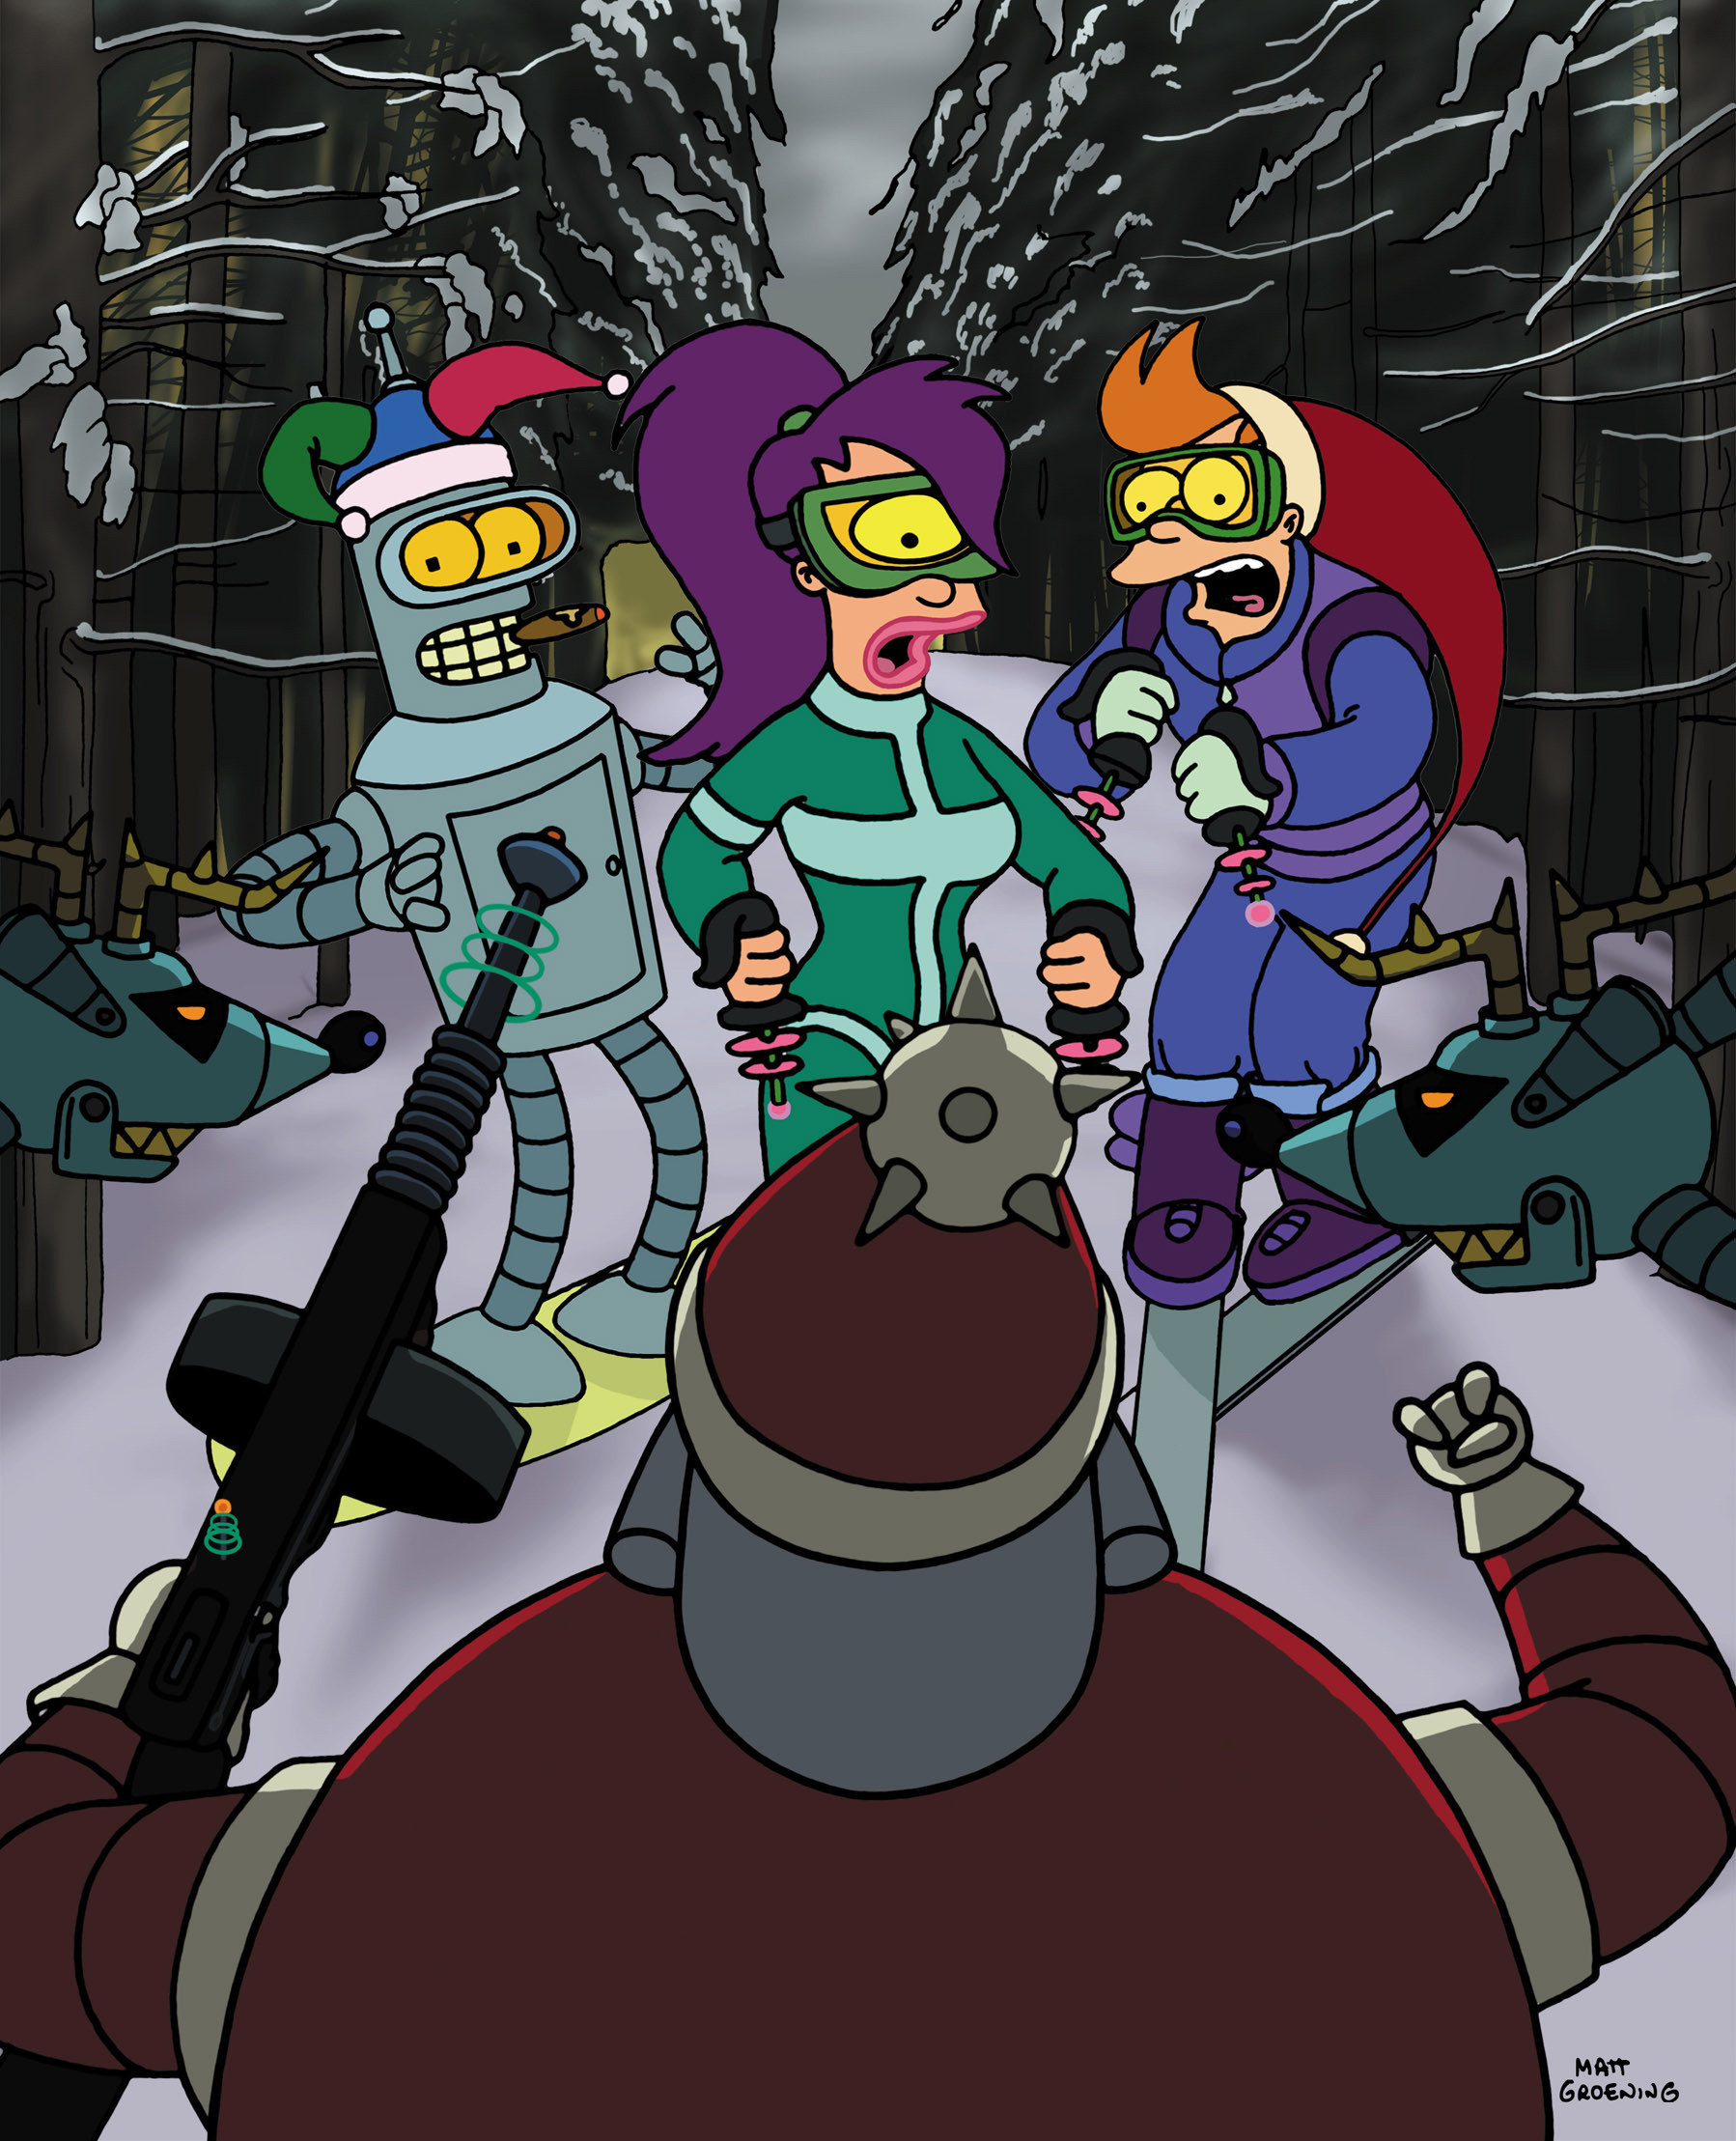 Bender, Leeloo and Fry come face to face with an evil, robotic Santa Claus in &quot;Futurama&quot;